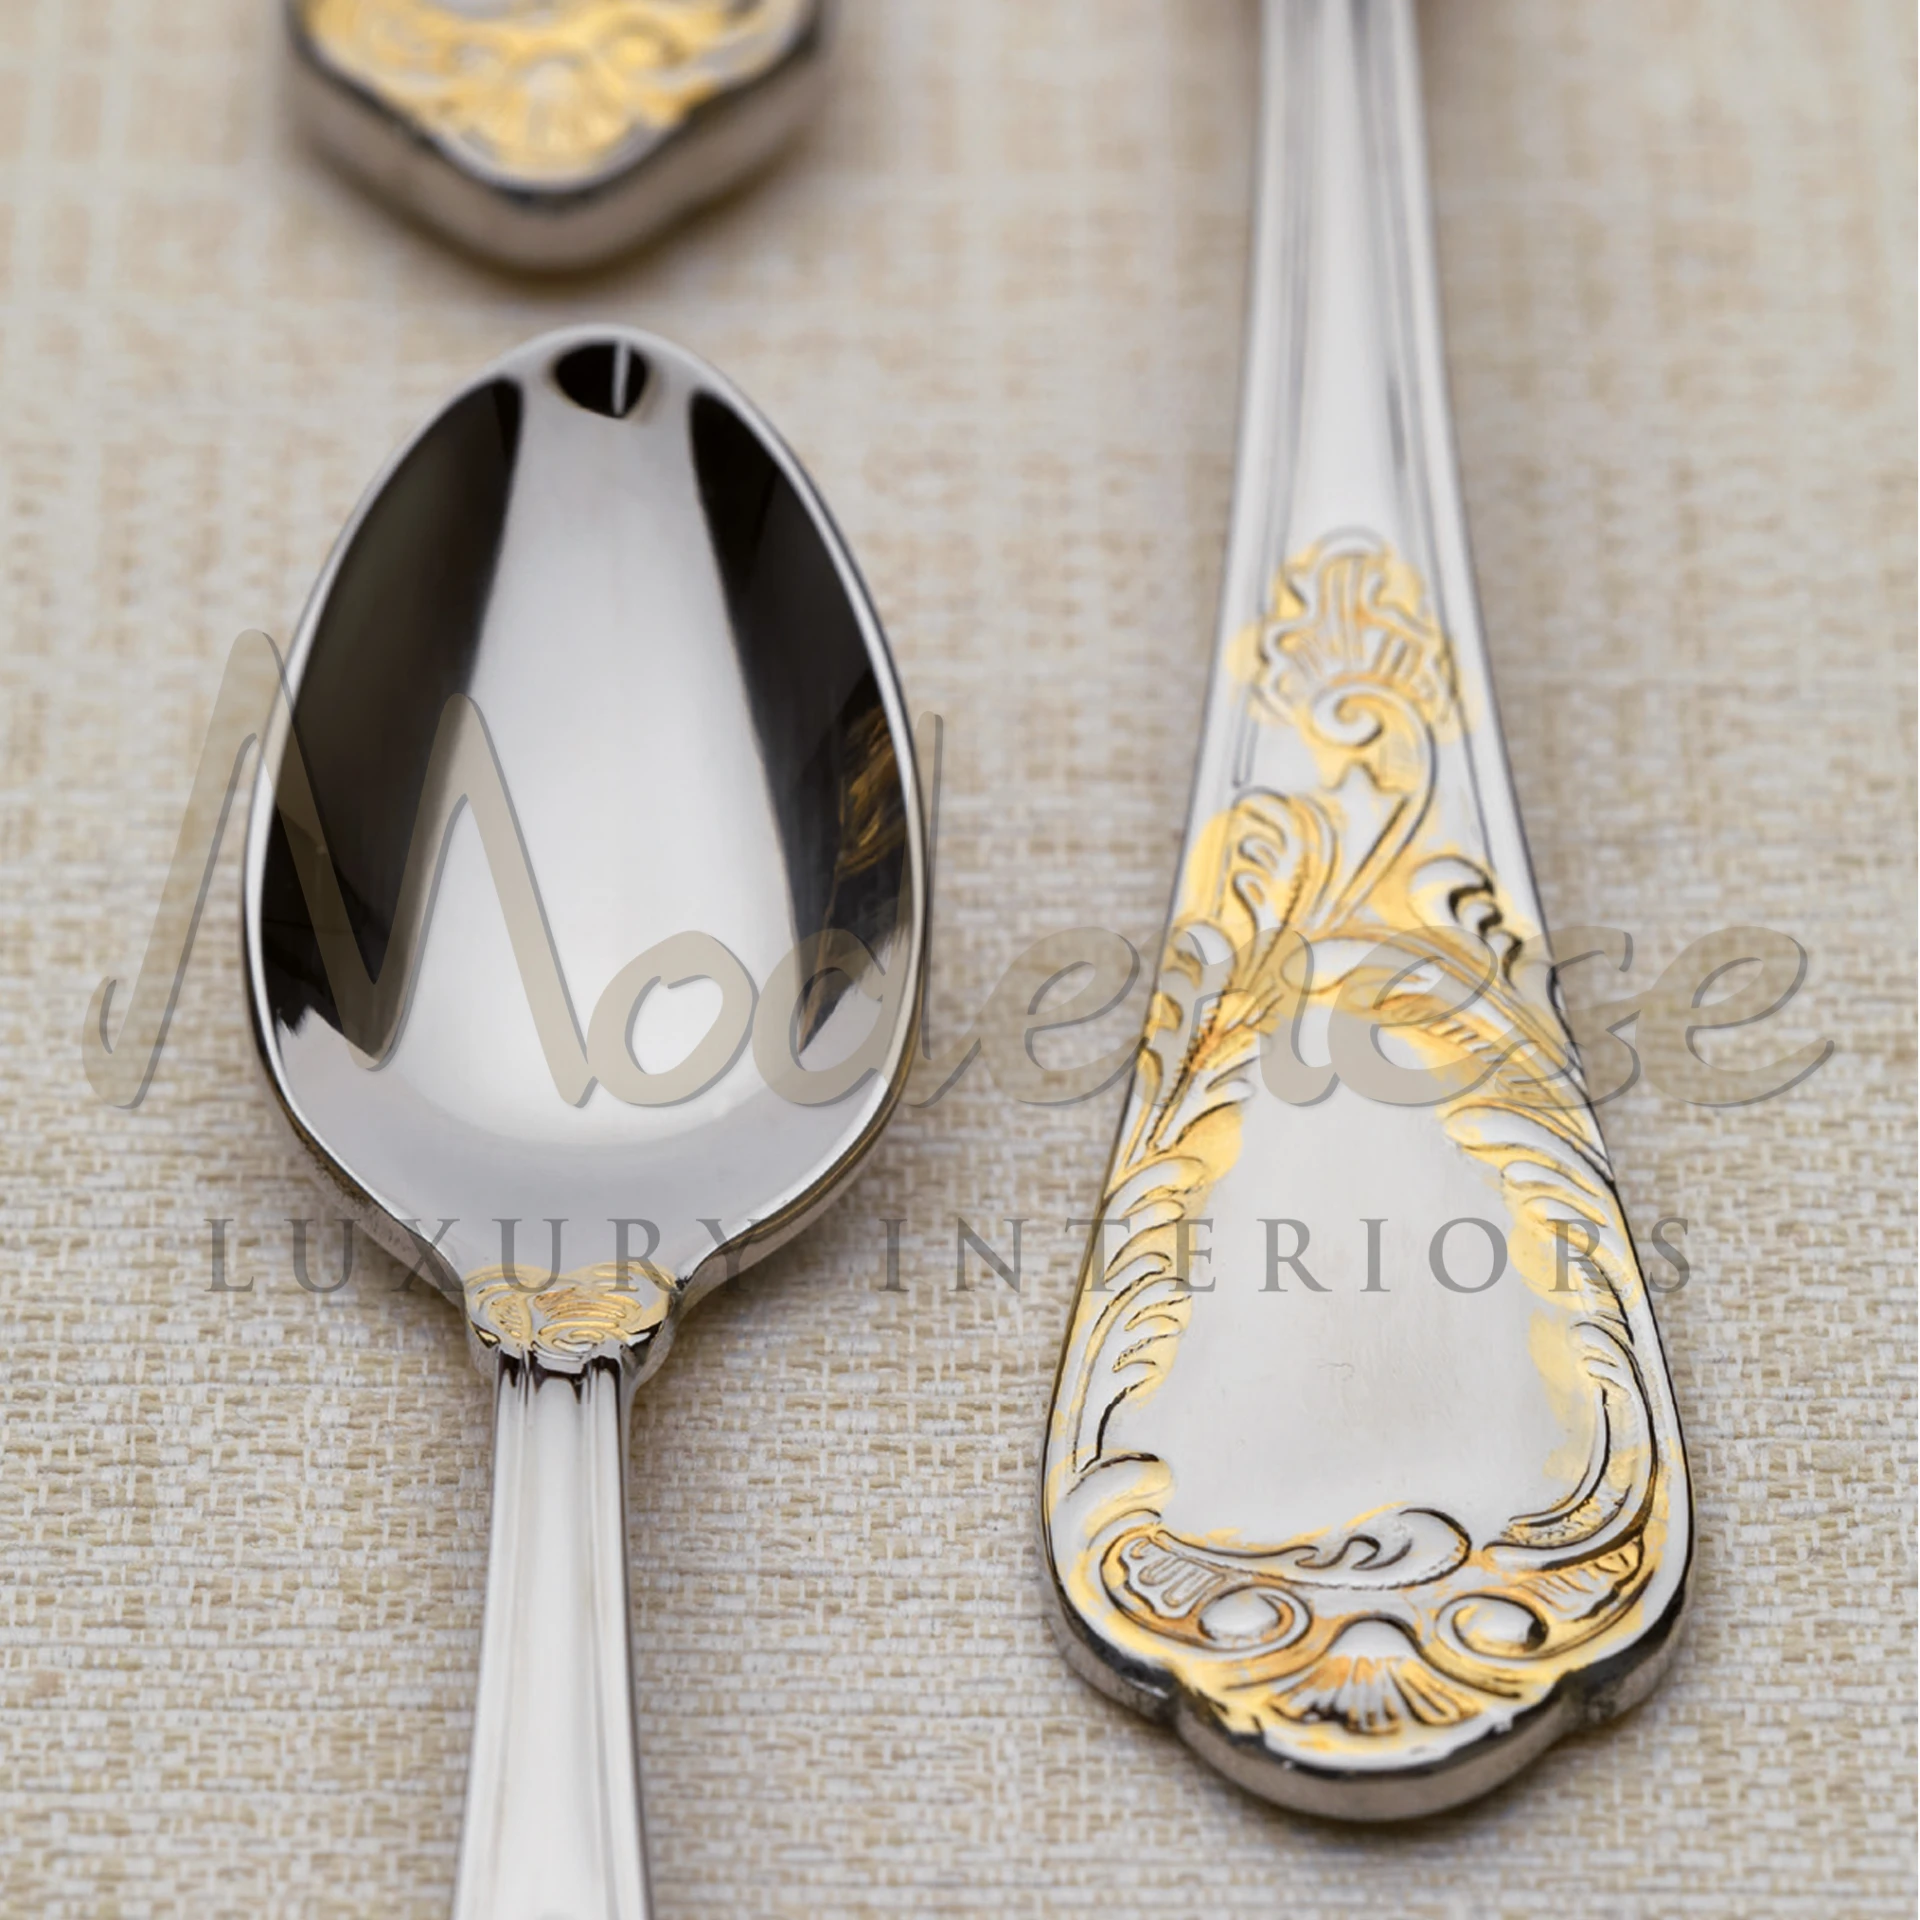 Close-up of an elegant silver spoon with gold detailing on the handle